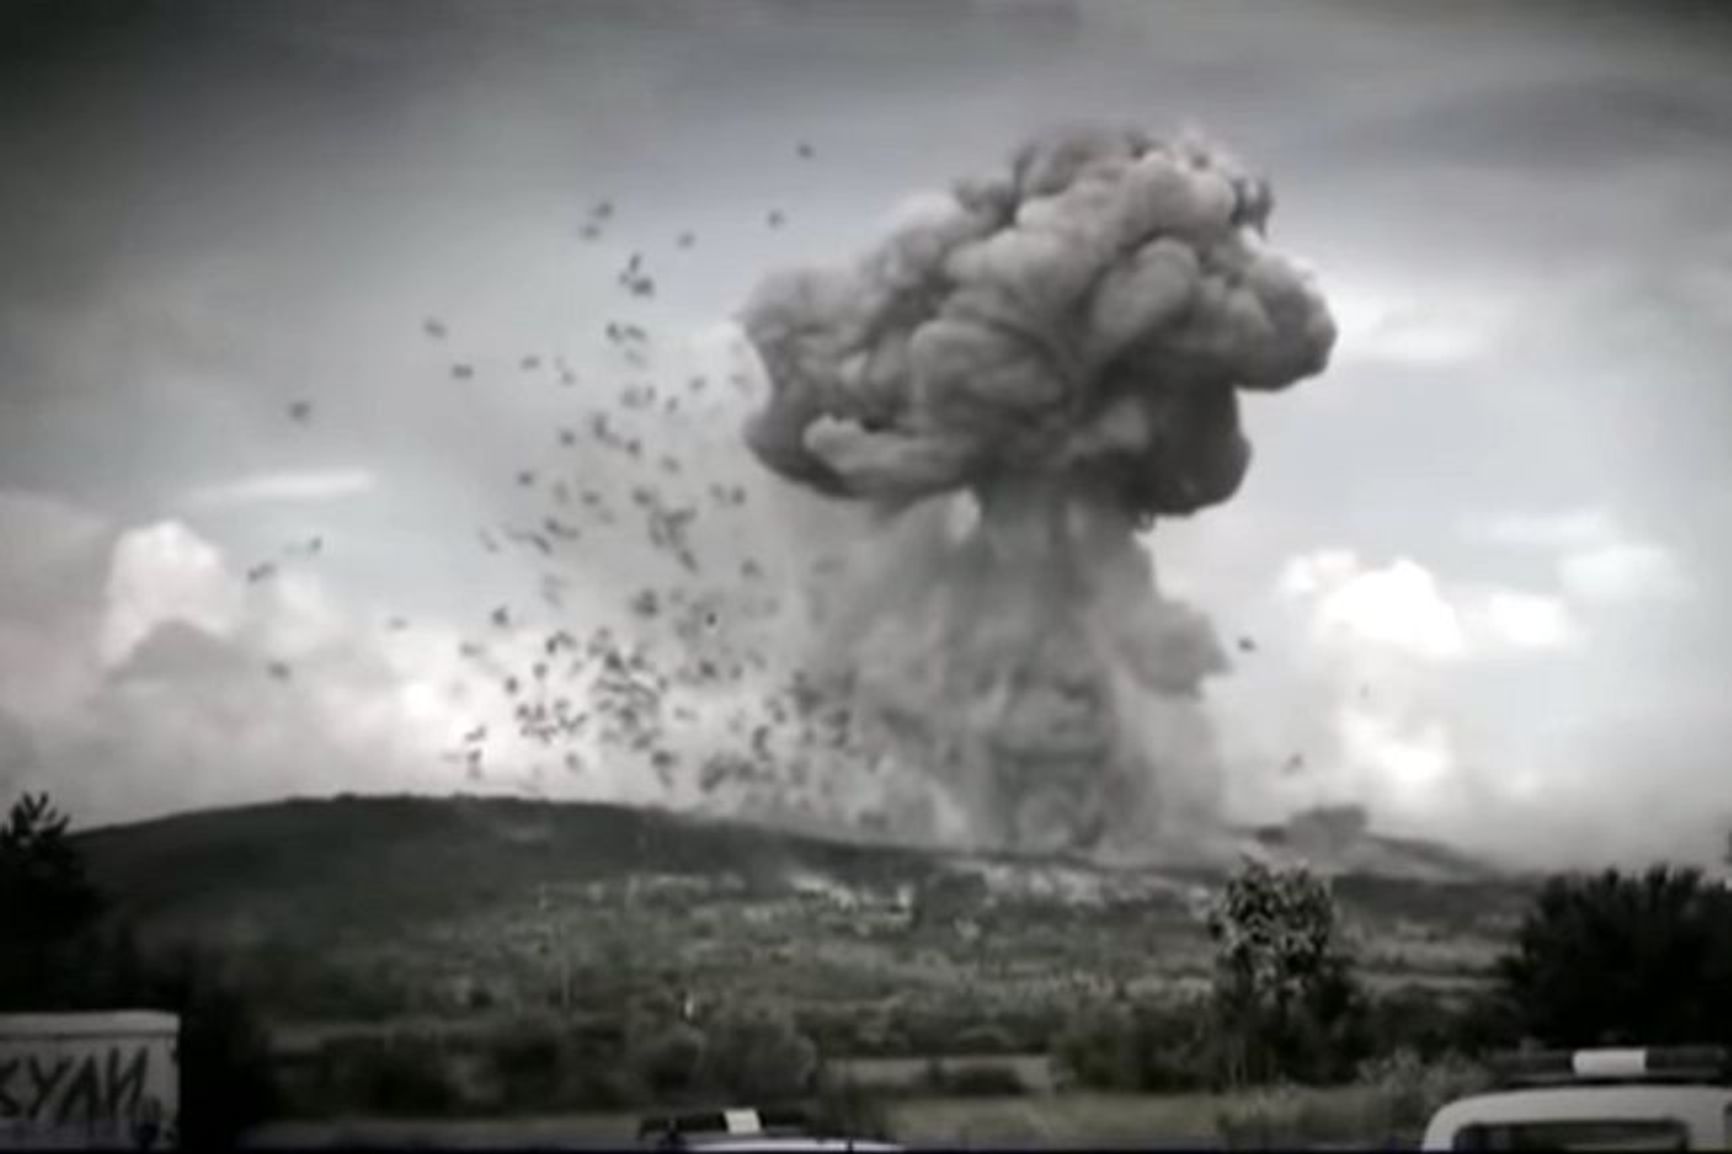 Screengrab from the moment of one of the serial explosions, caught by Bulgarian TV crews arriving near the scene on 12 November 2011